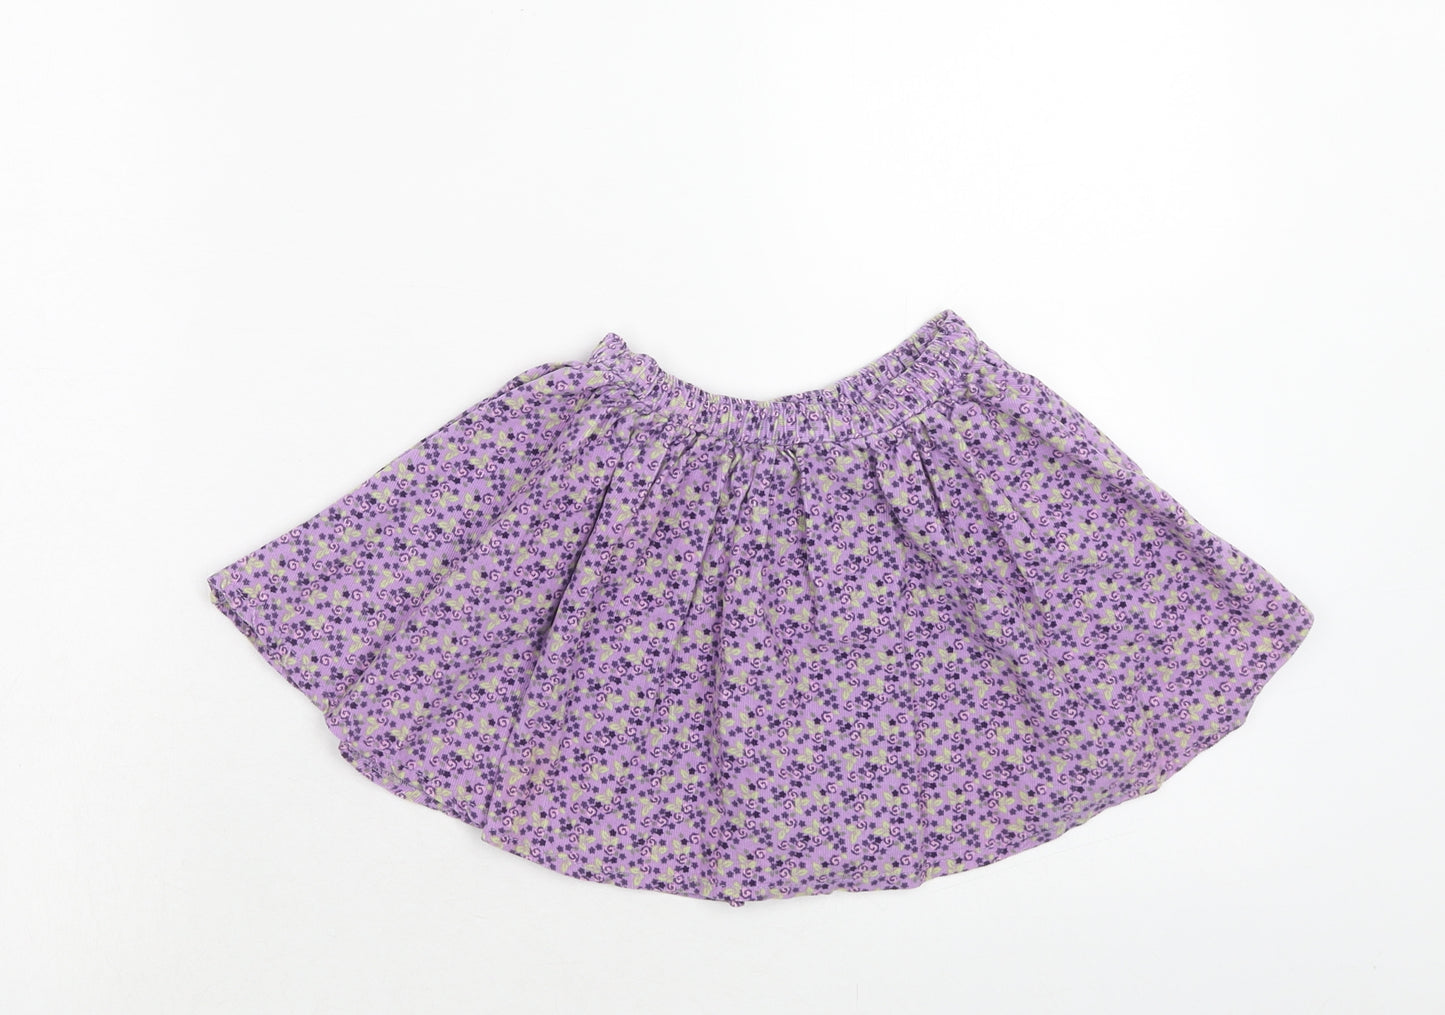 George Girls Purple Floral Cotton Skater Skirt Size 12-18 Months Pull On